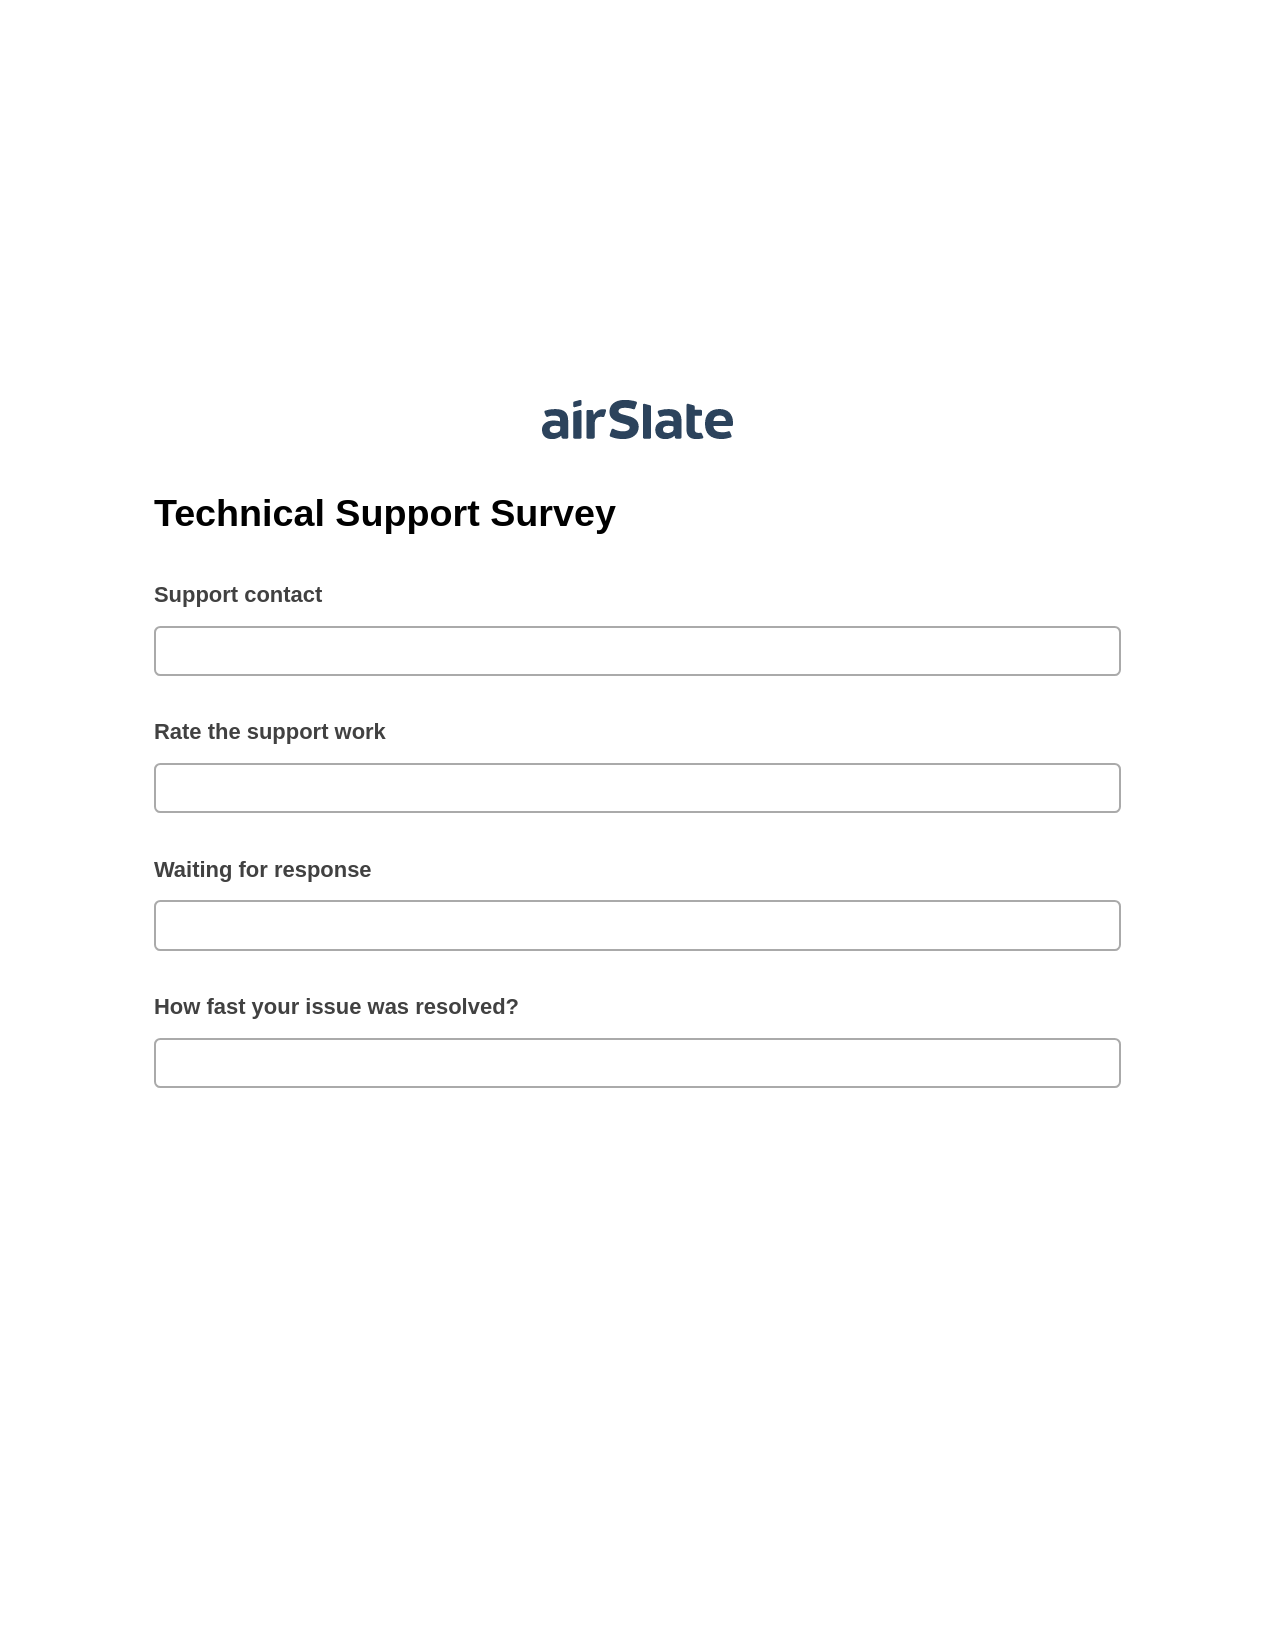 Technical Support Survey Pre-fill from CSV File Bot, Unassign Role Bot, Export to Google Sheet Bot